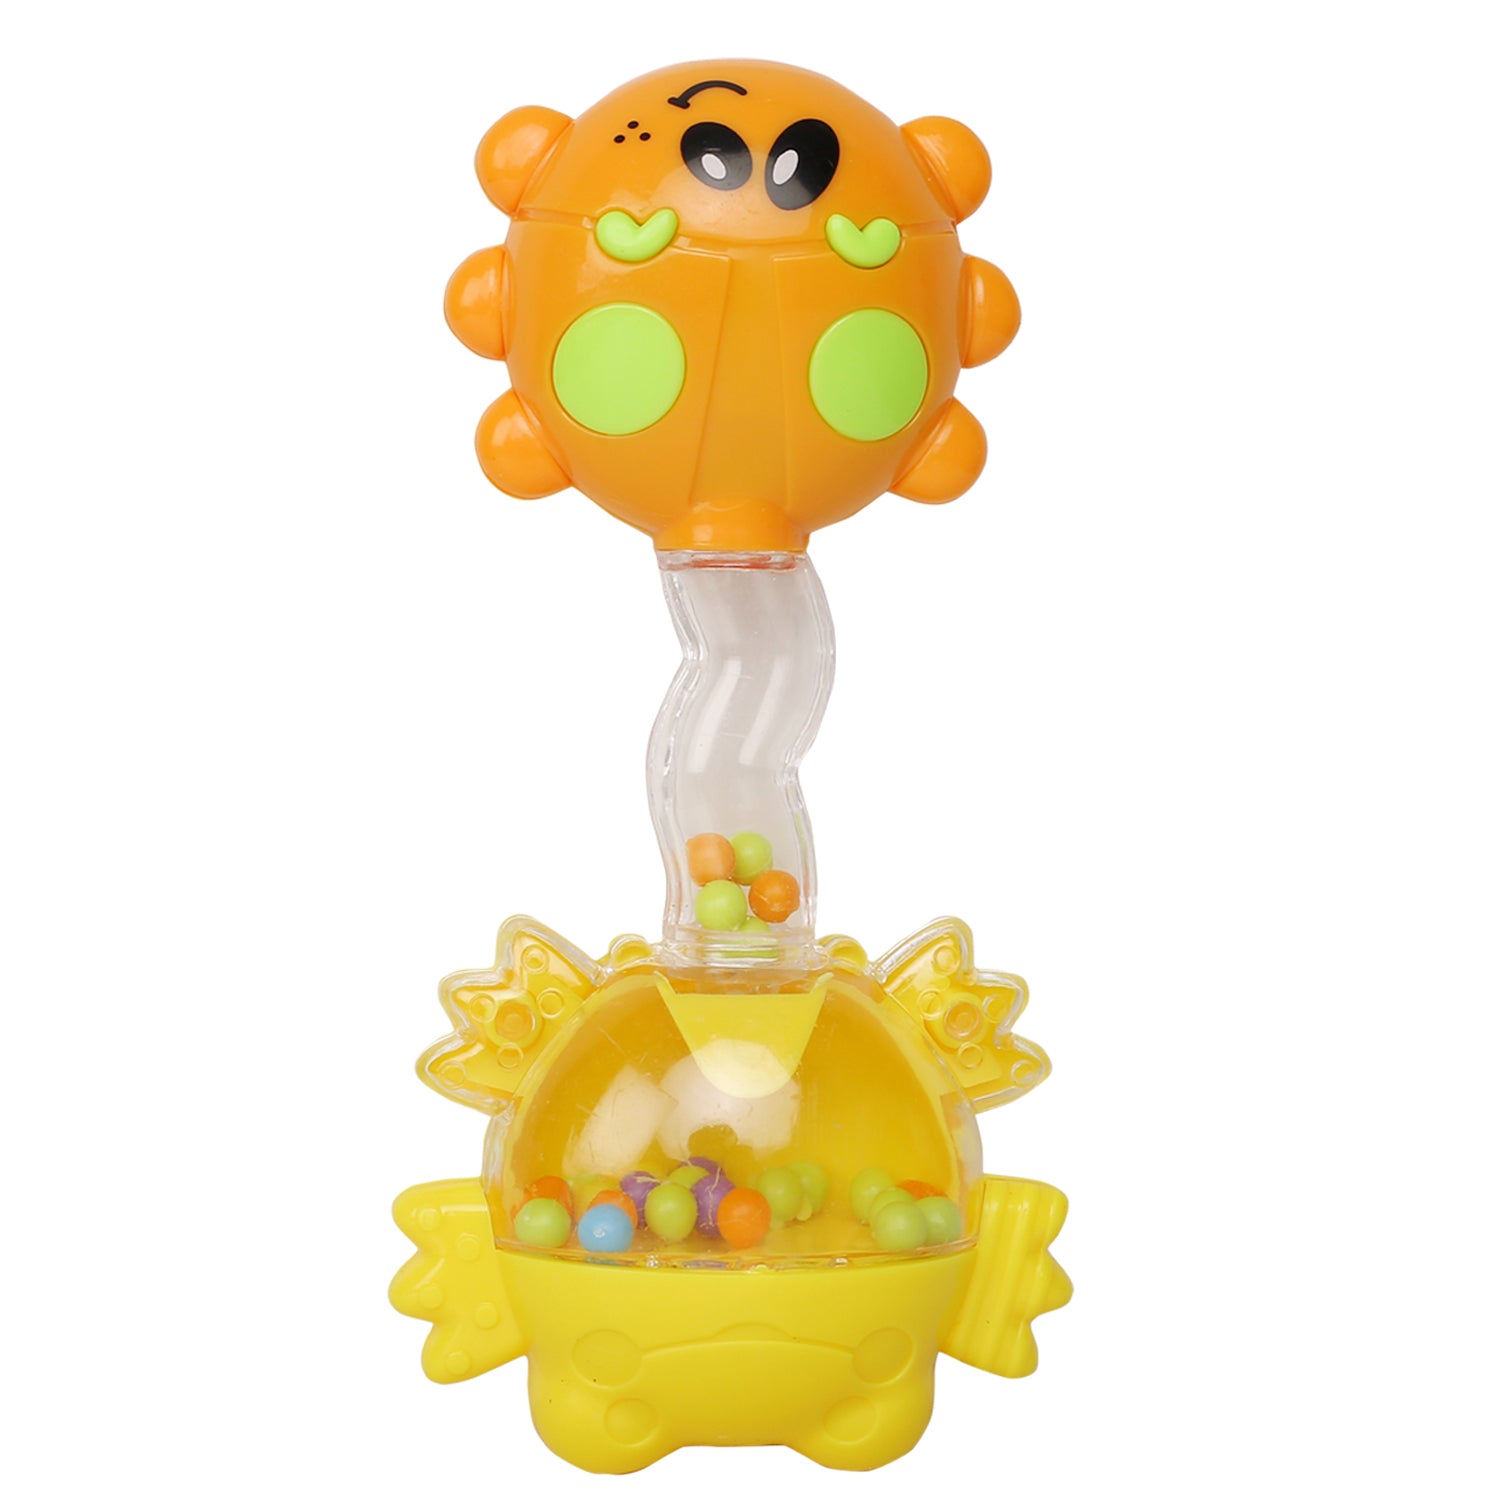 Fun-filled Multicolour Rattle Toy - Baby Moo